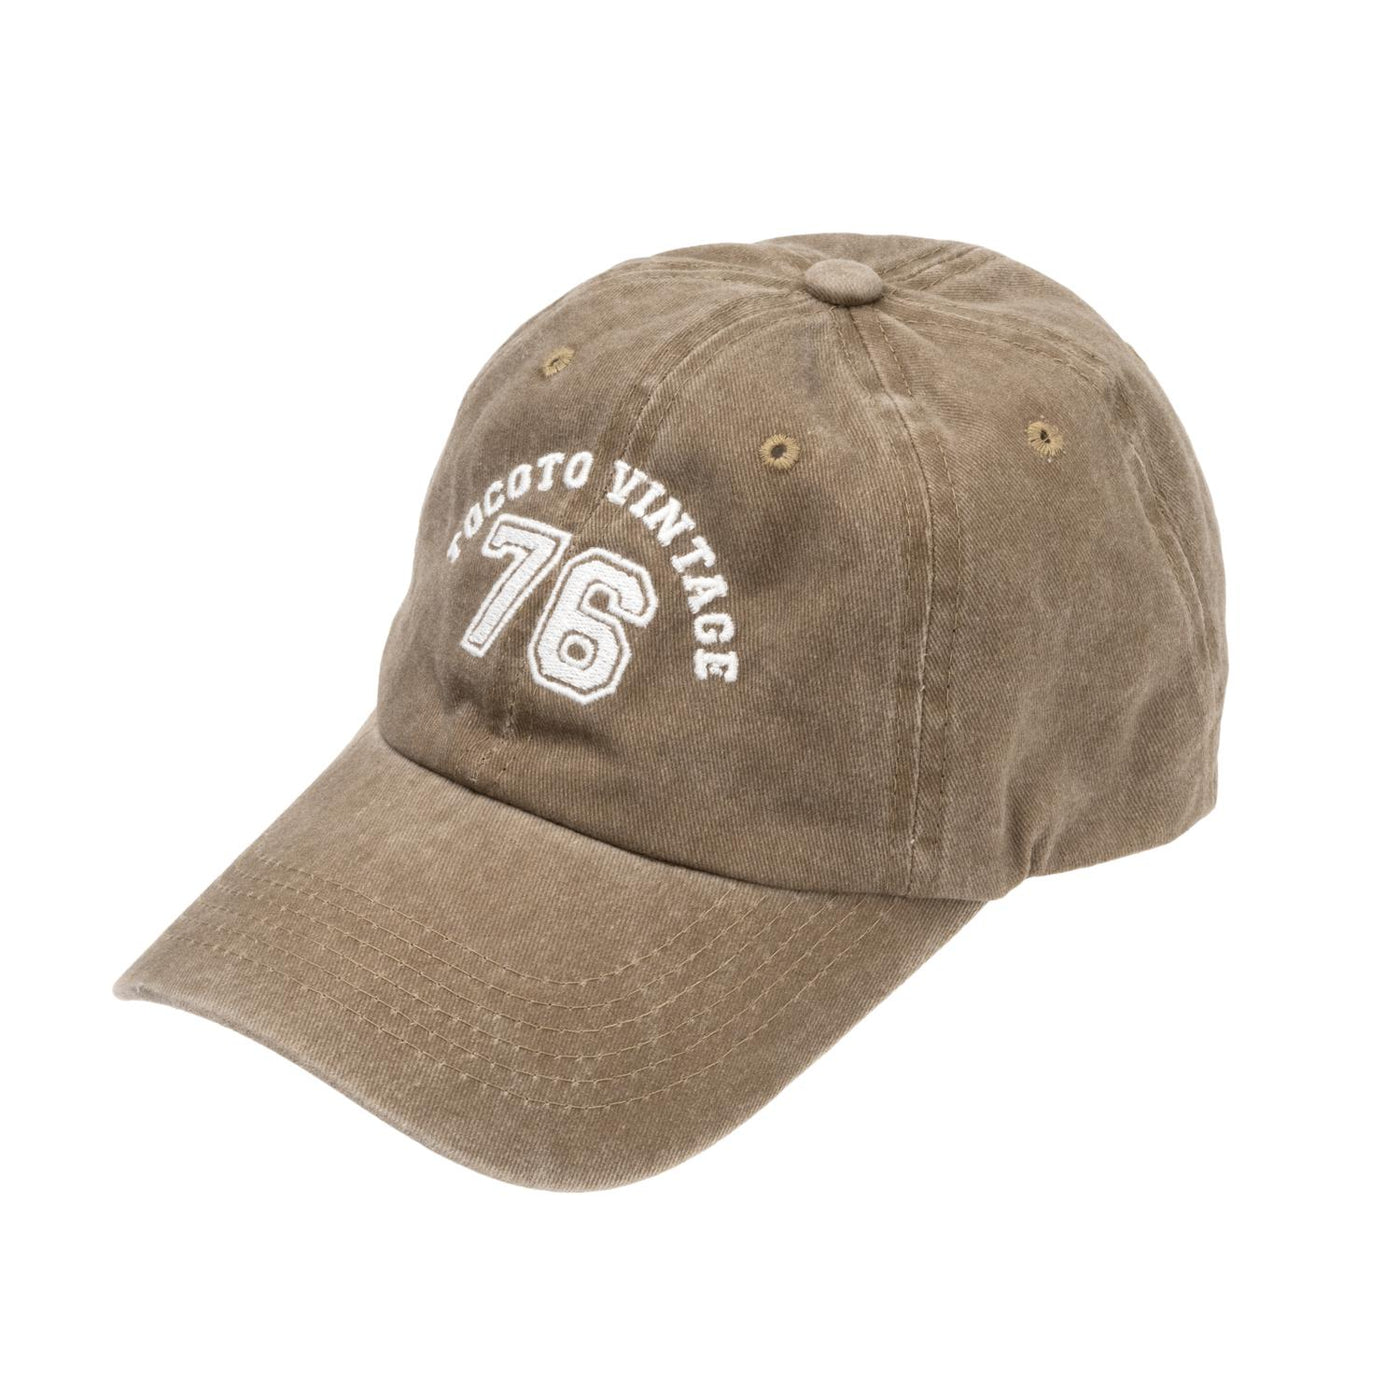 Embroidered 76 Cap